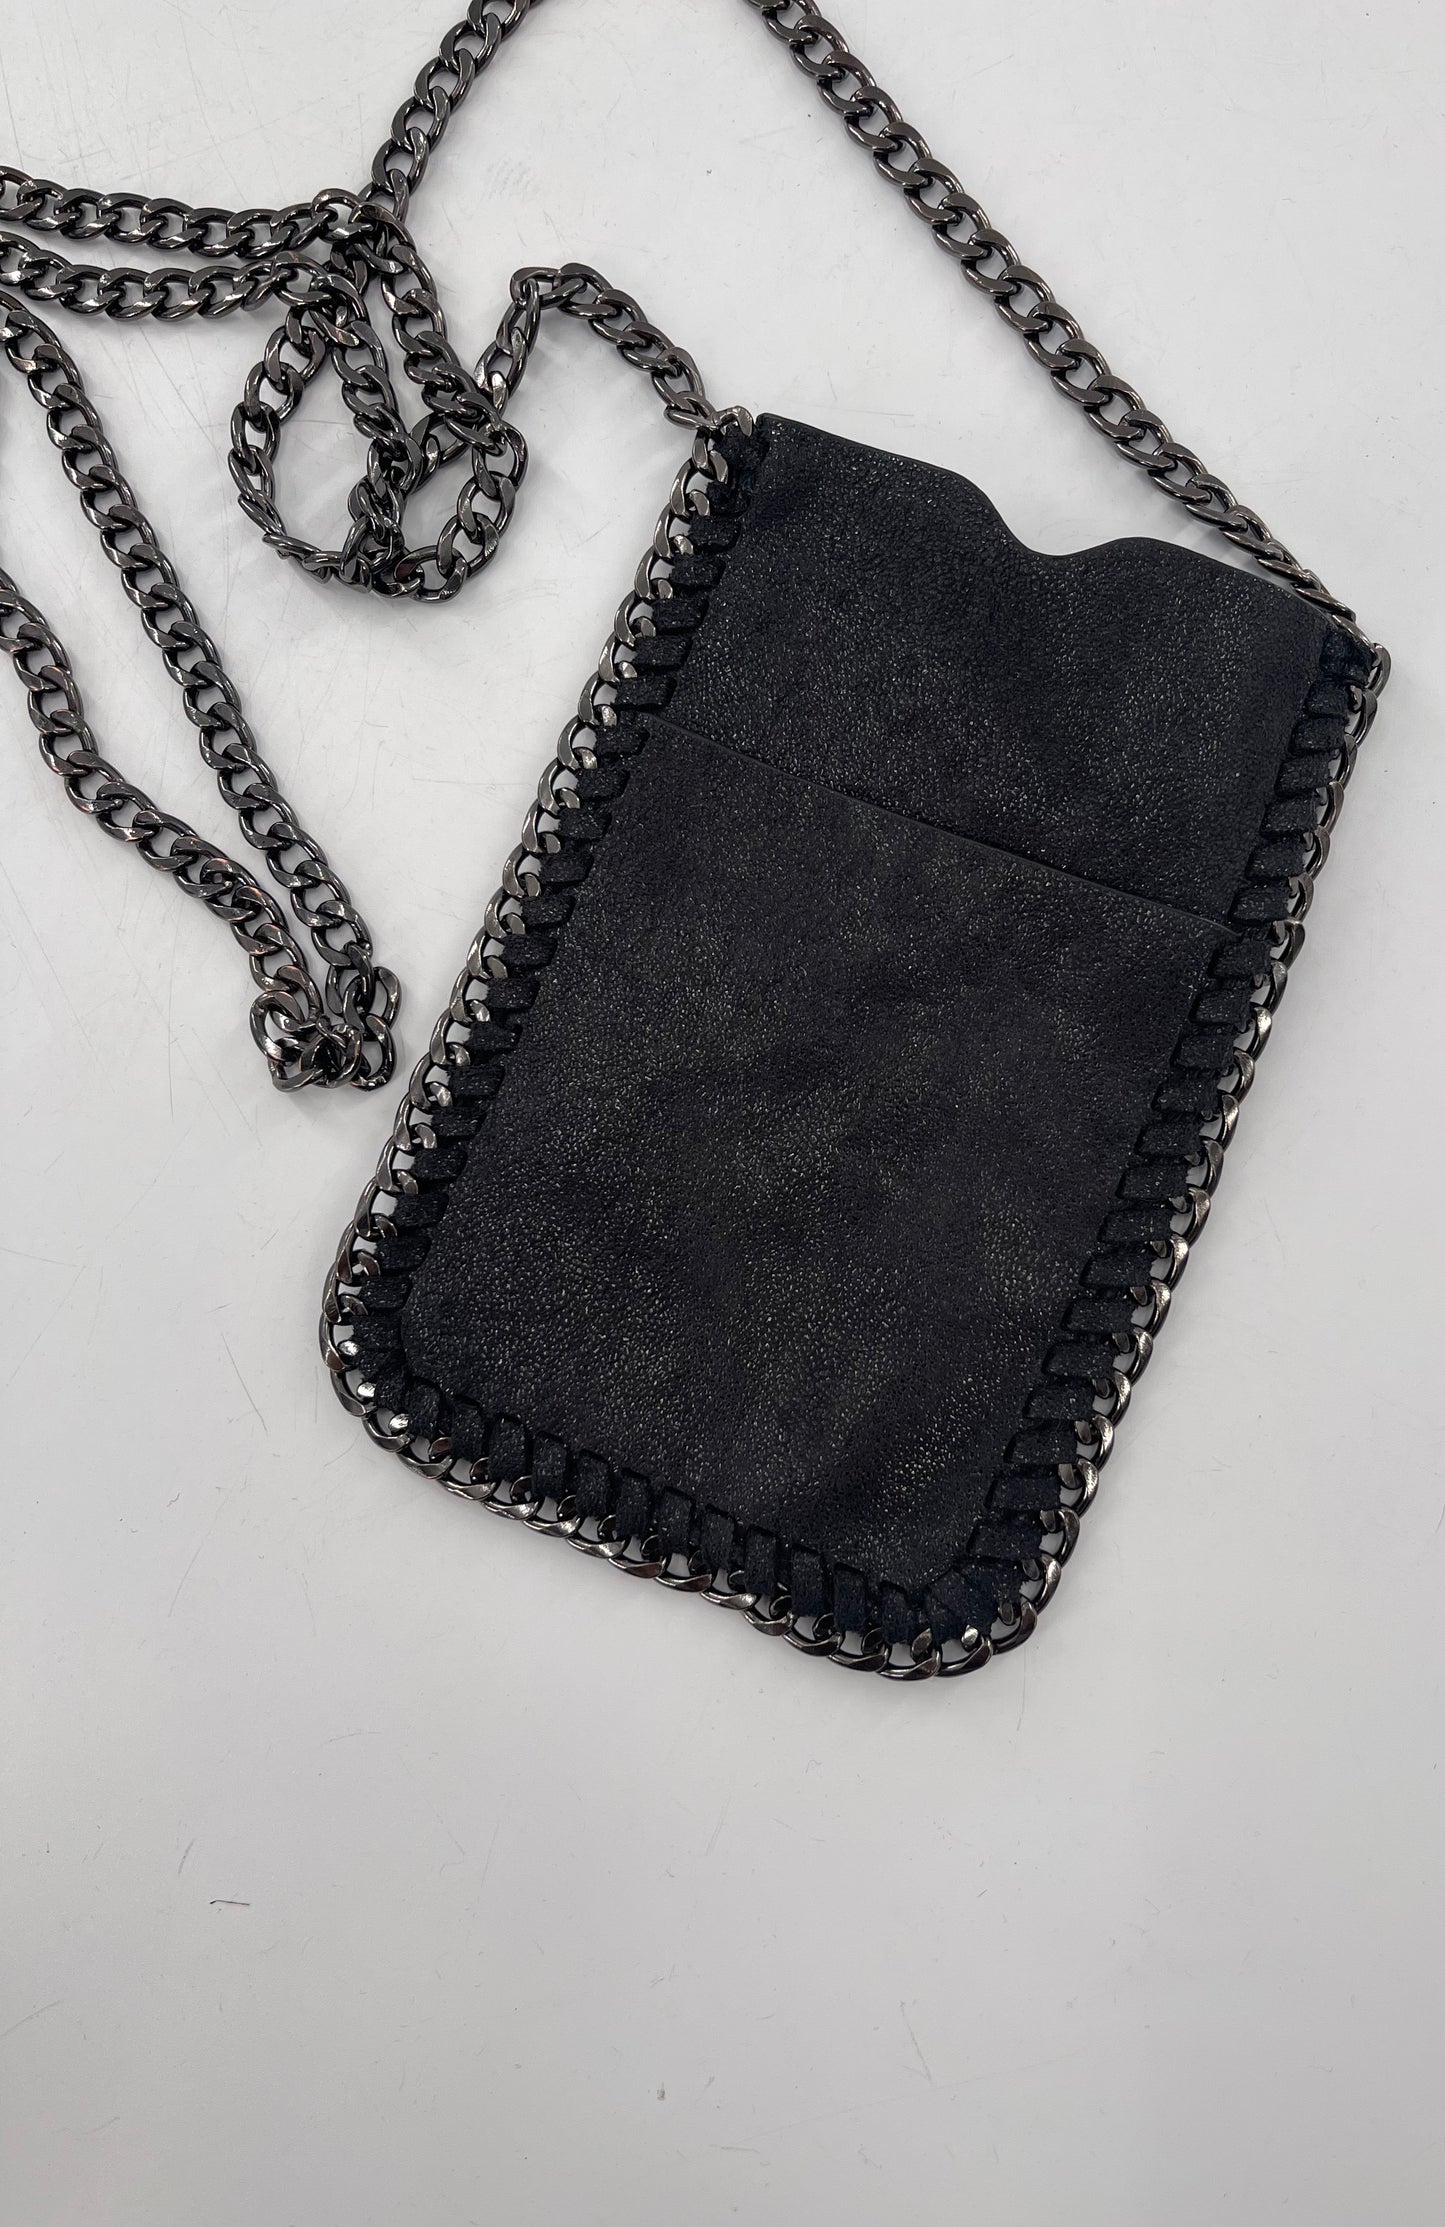 Metallic Black Leather Chain Lined Phone Pouch